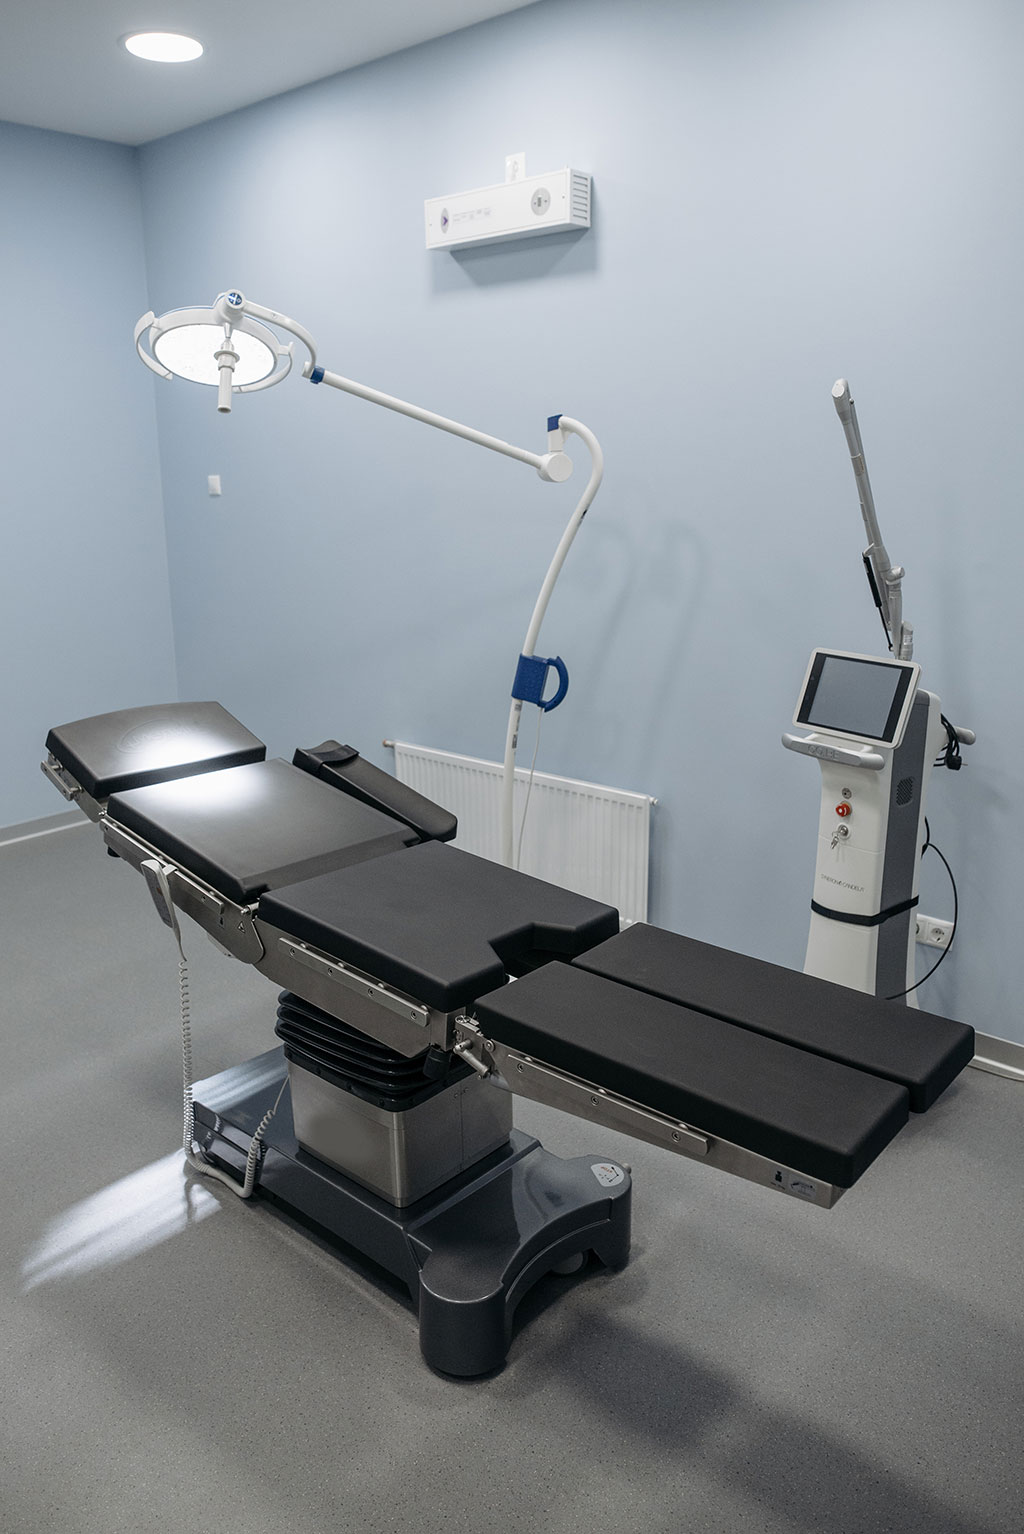 Image: Global surgical tables market is projected to record CAGR of 3.9% over 2017-2022 (Photo courtesy of Pexels)